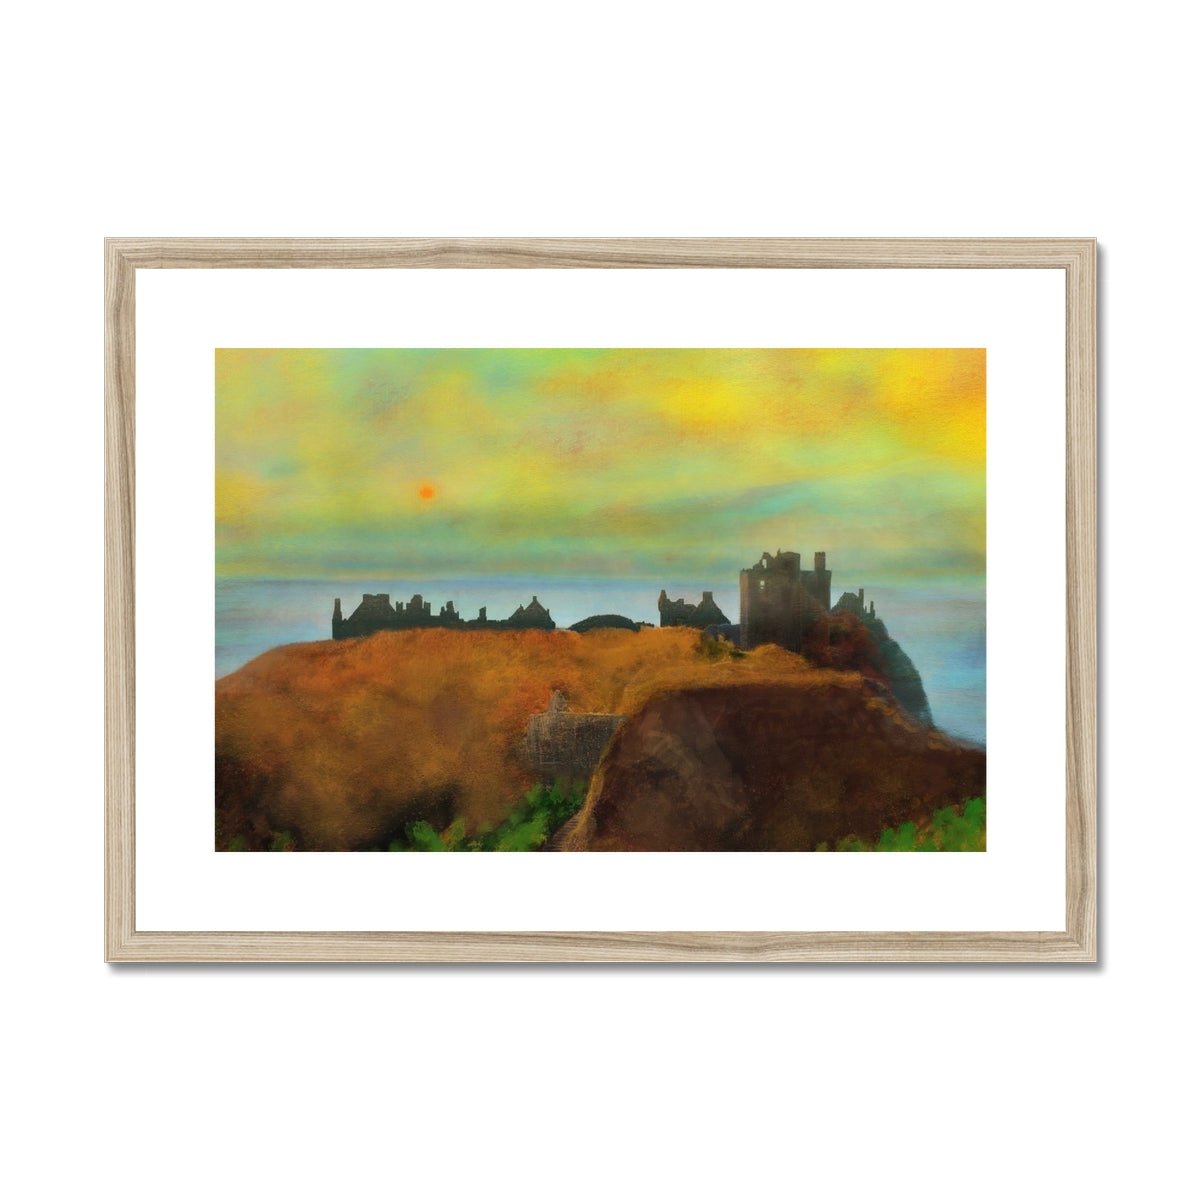 Dunnottar Castle Dusk Dusk Painting | Framed & Mounted Prints From Scotland-Framed & Mounted Prints-Historic & Iconic Scotland Art Gallery-A2 Landscape-Natural Frame-Paintings, Prints, Homeware, Art Gifts From Scotland By Scottish Artist Kevin Hunter